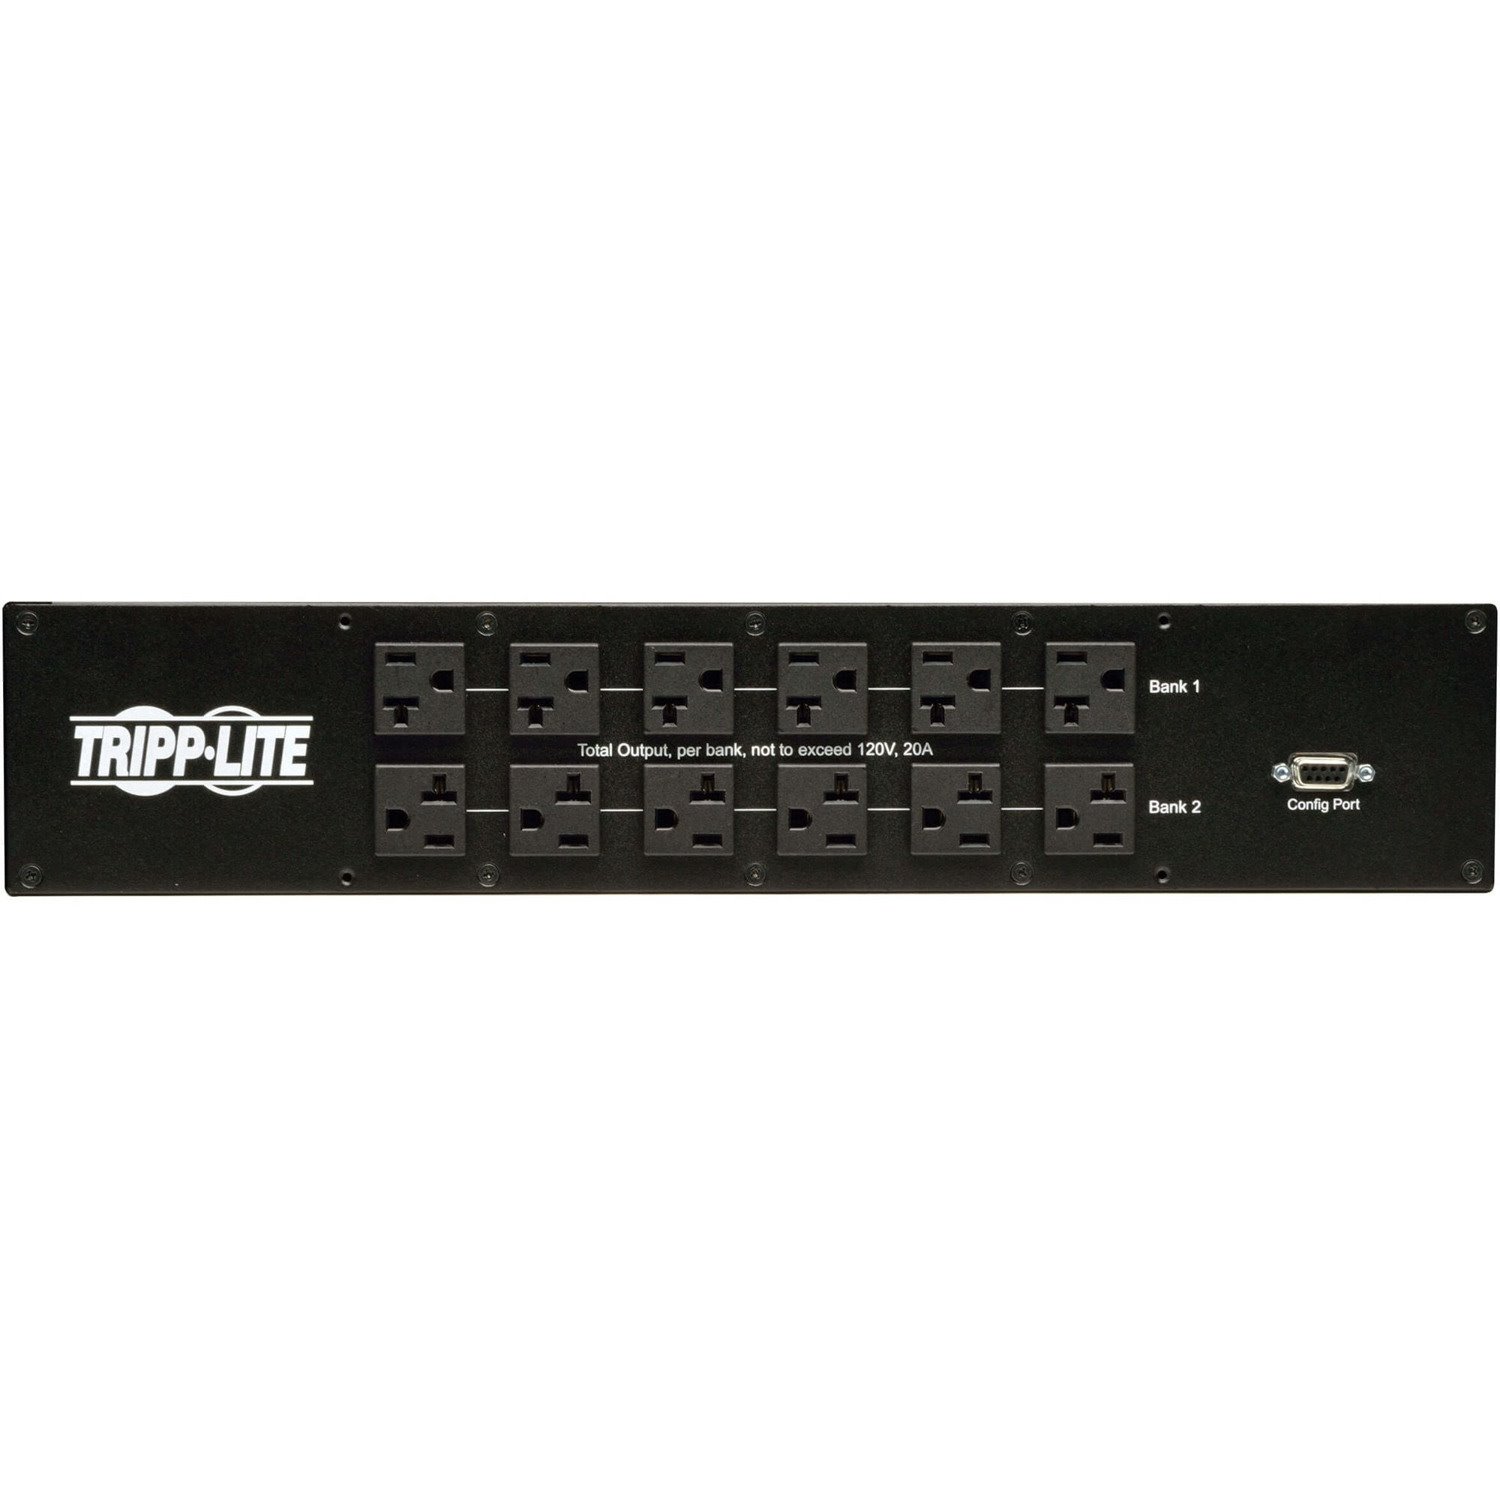 Tripp Lite by Eaton 2.9kW Single-Phase Local Metered Automatic Transfer Switch PDU, 2 120V L5-30P Inputs, 24 5-15/20R & 1 L5-30R Outputs, 2U, TAA